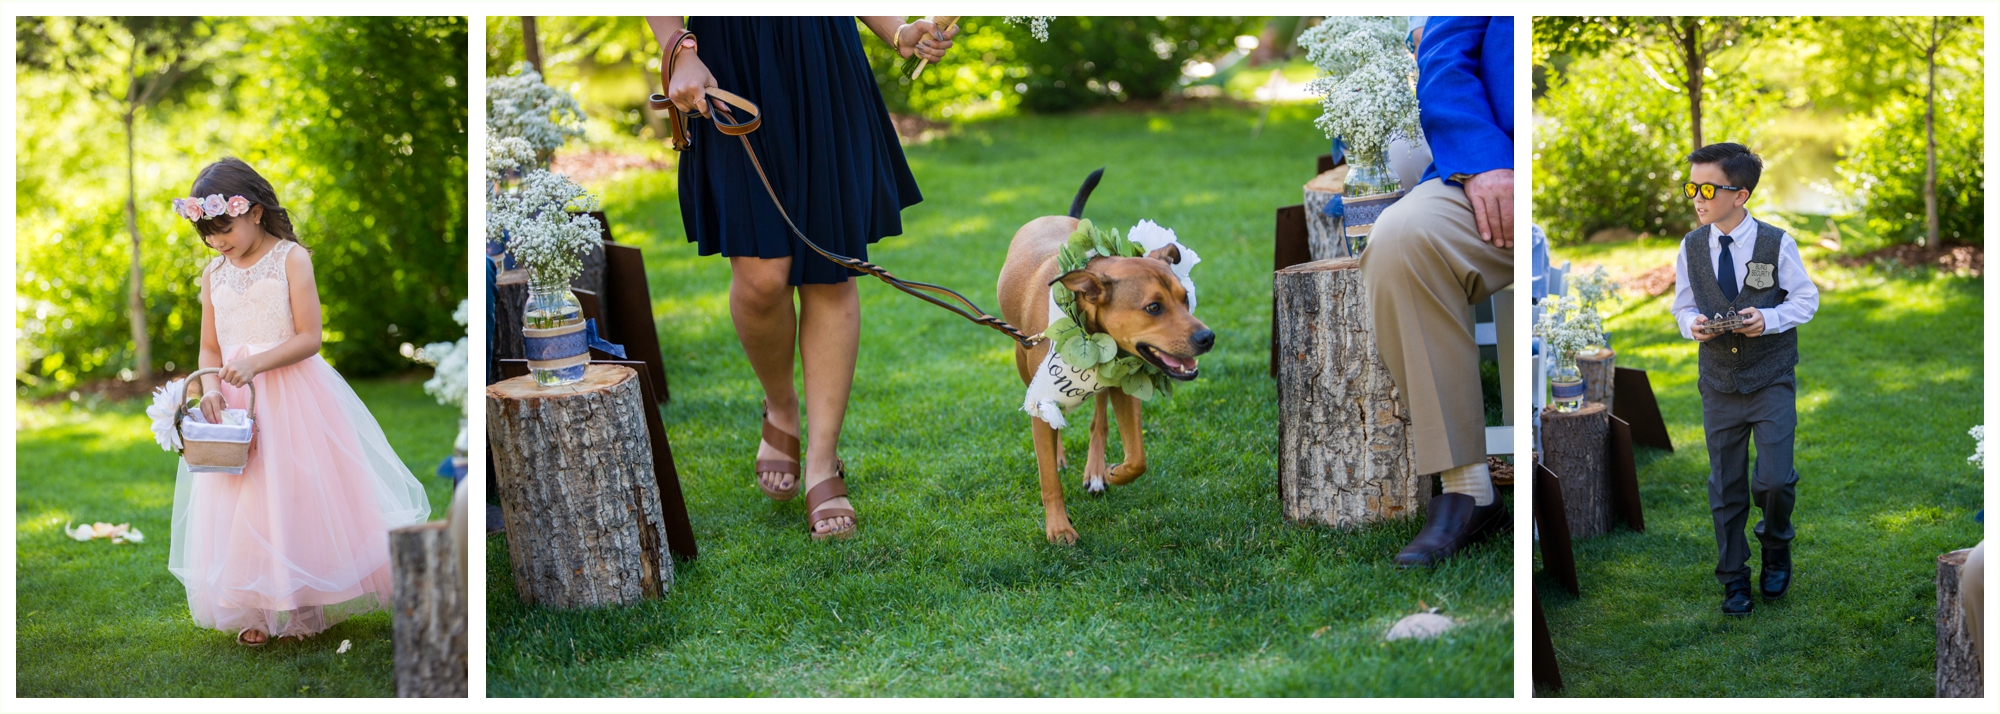 flower girl, ring bearer and bride and groom's dog walk down the aisle for wedding ceremony